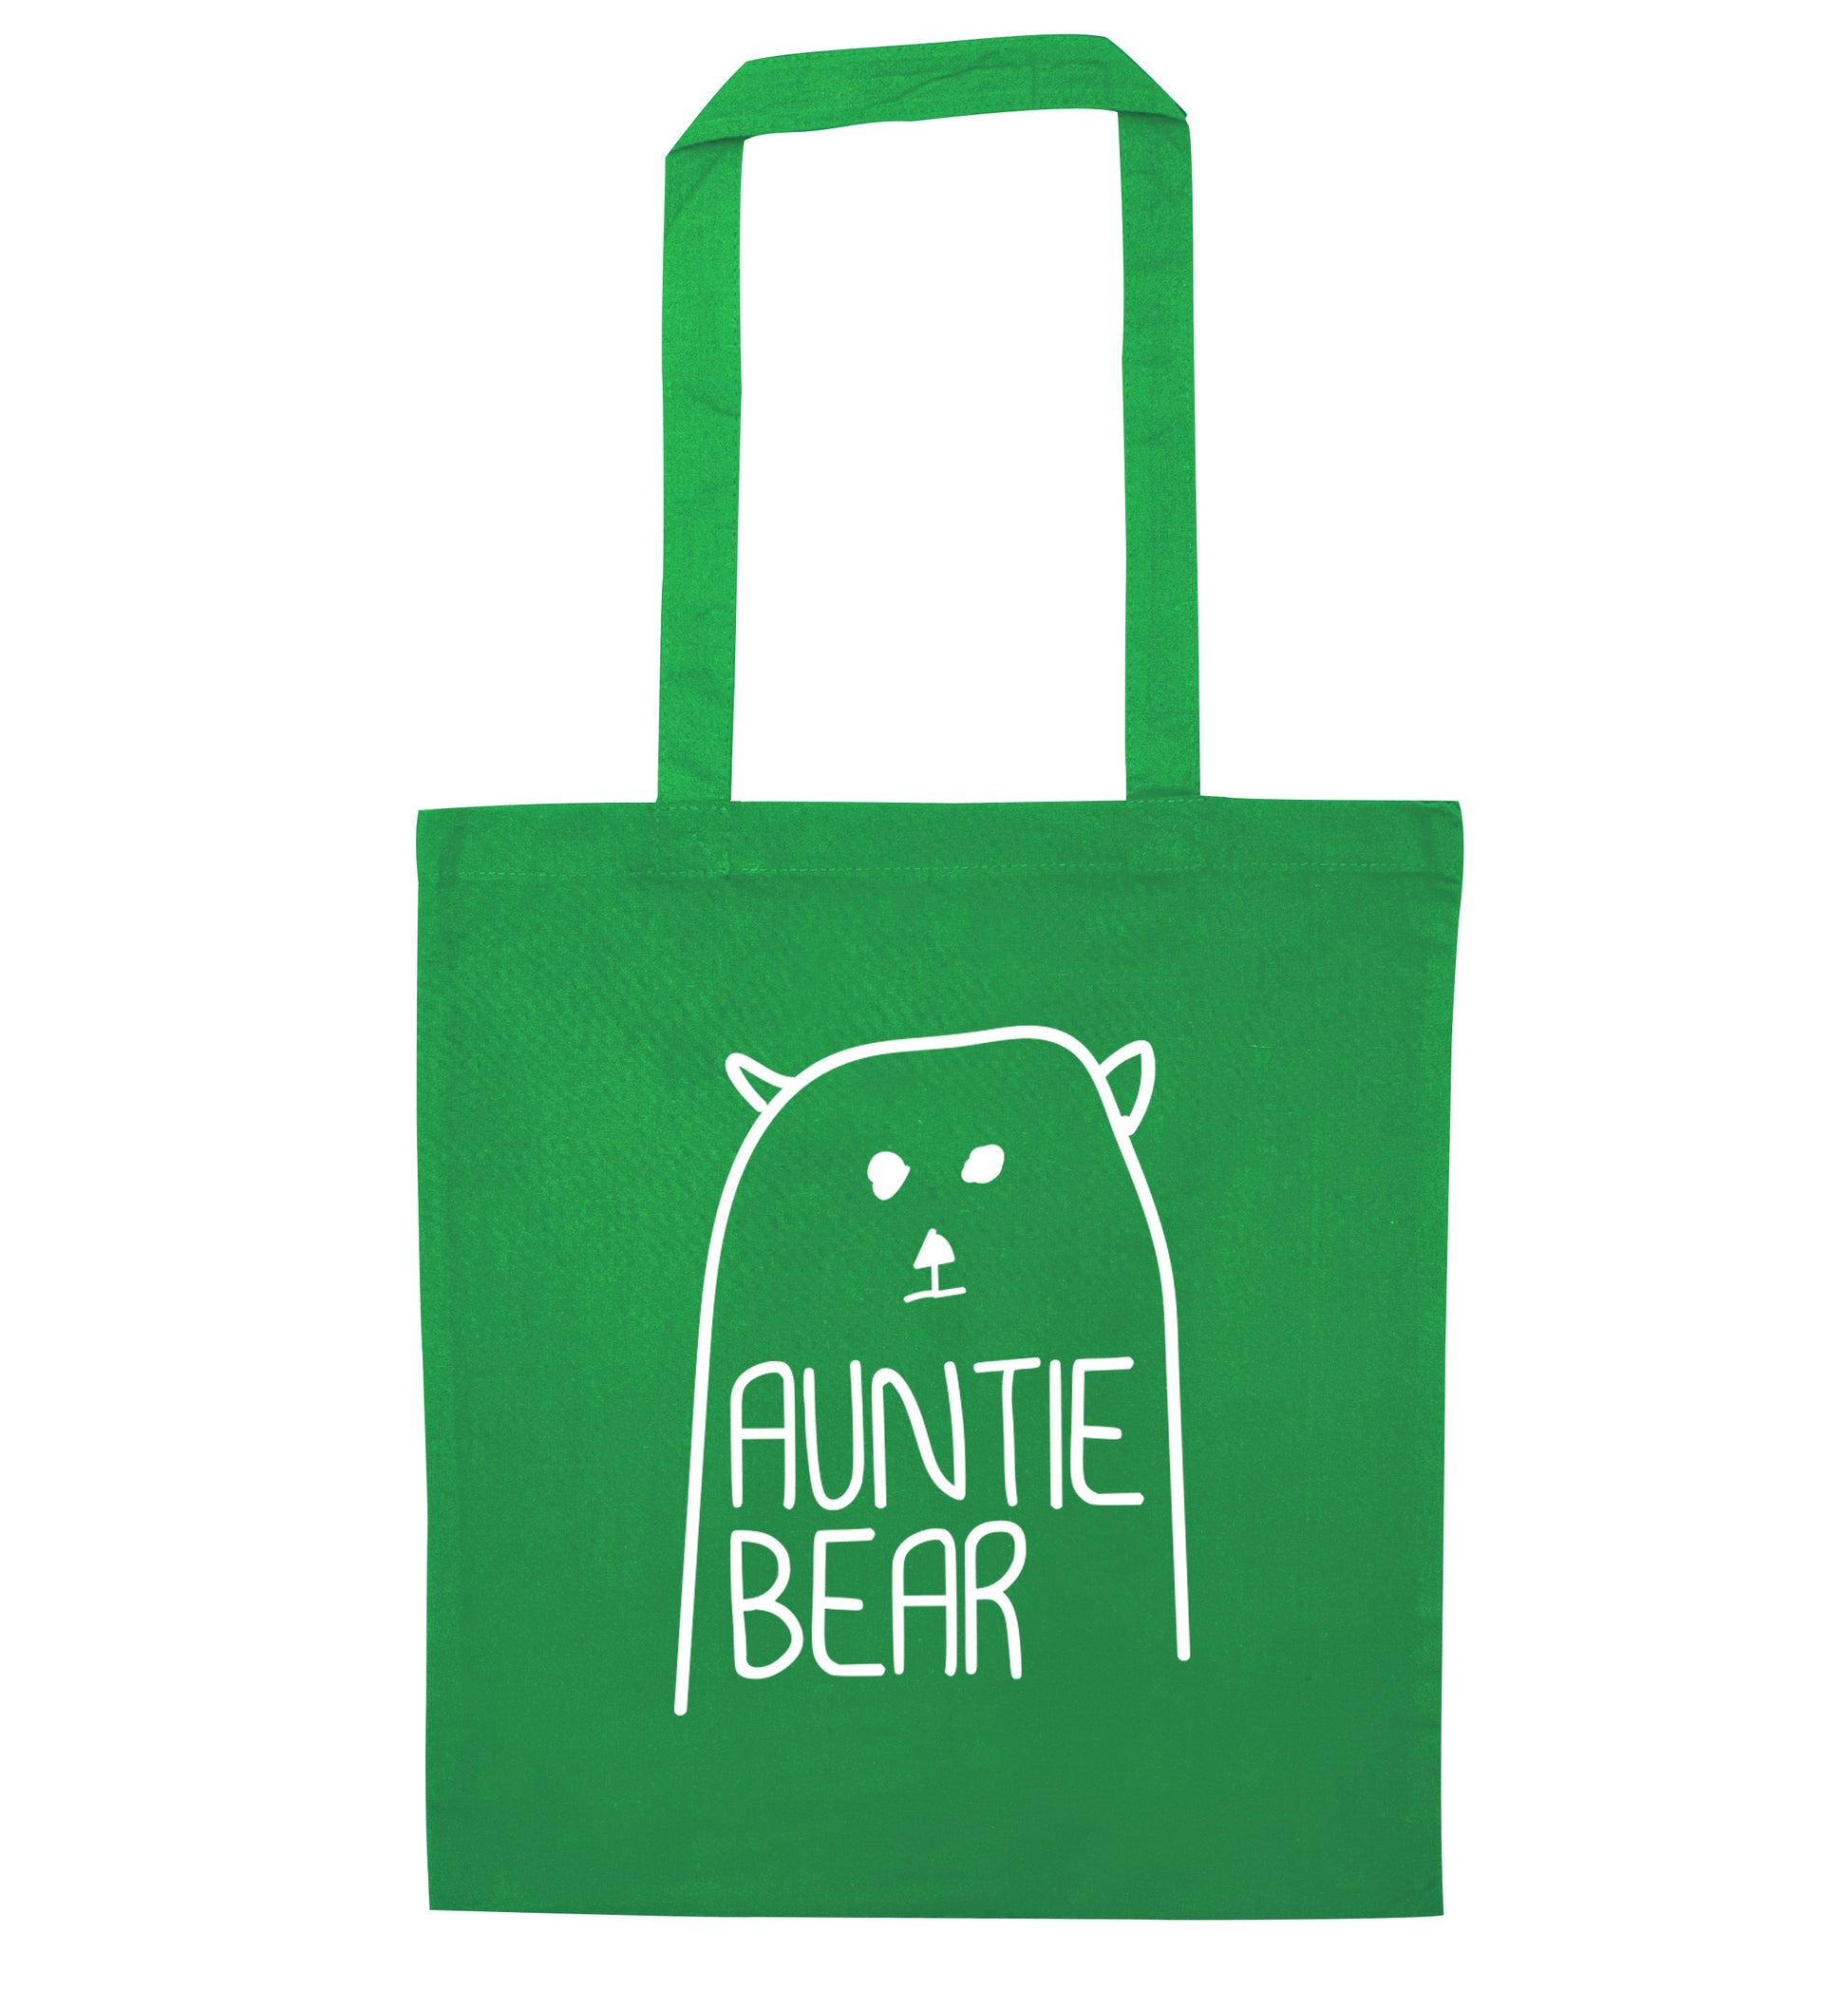 Auntie bear green tote bag